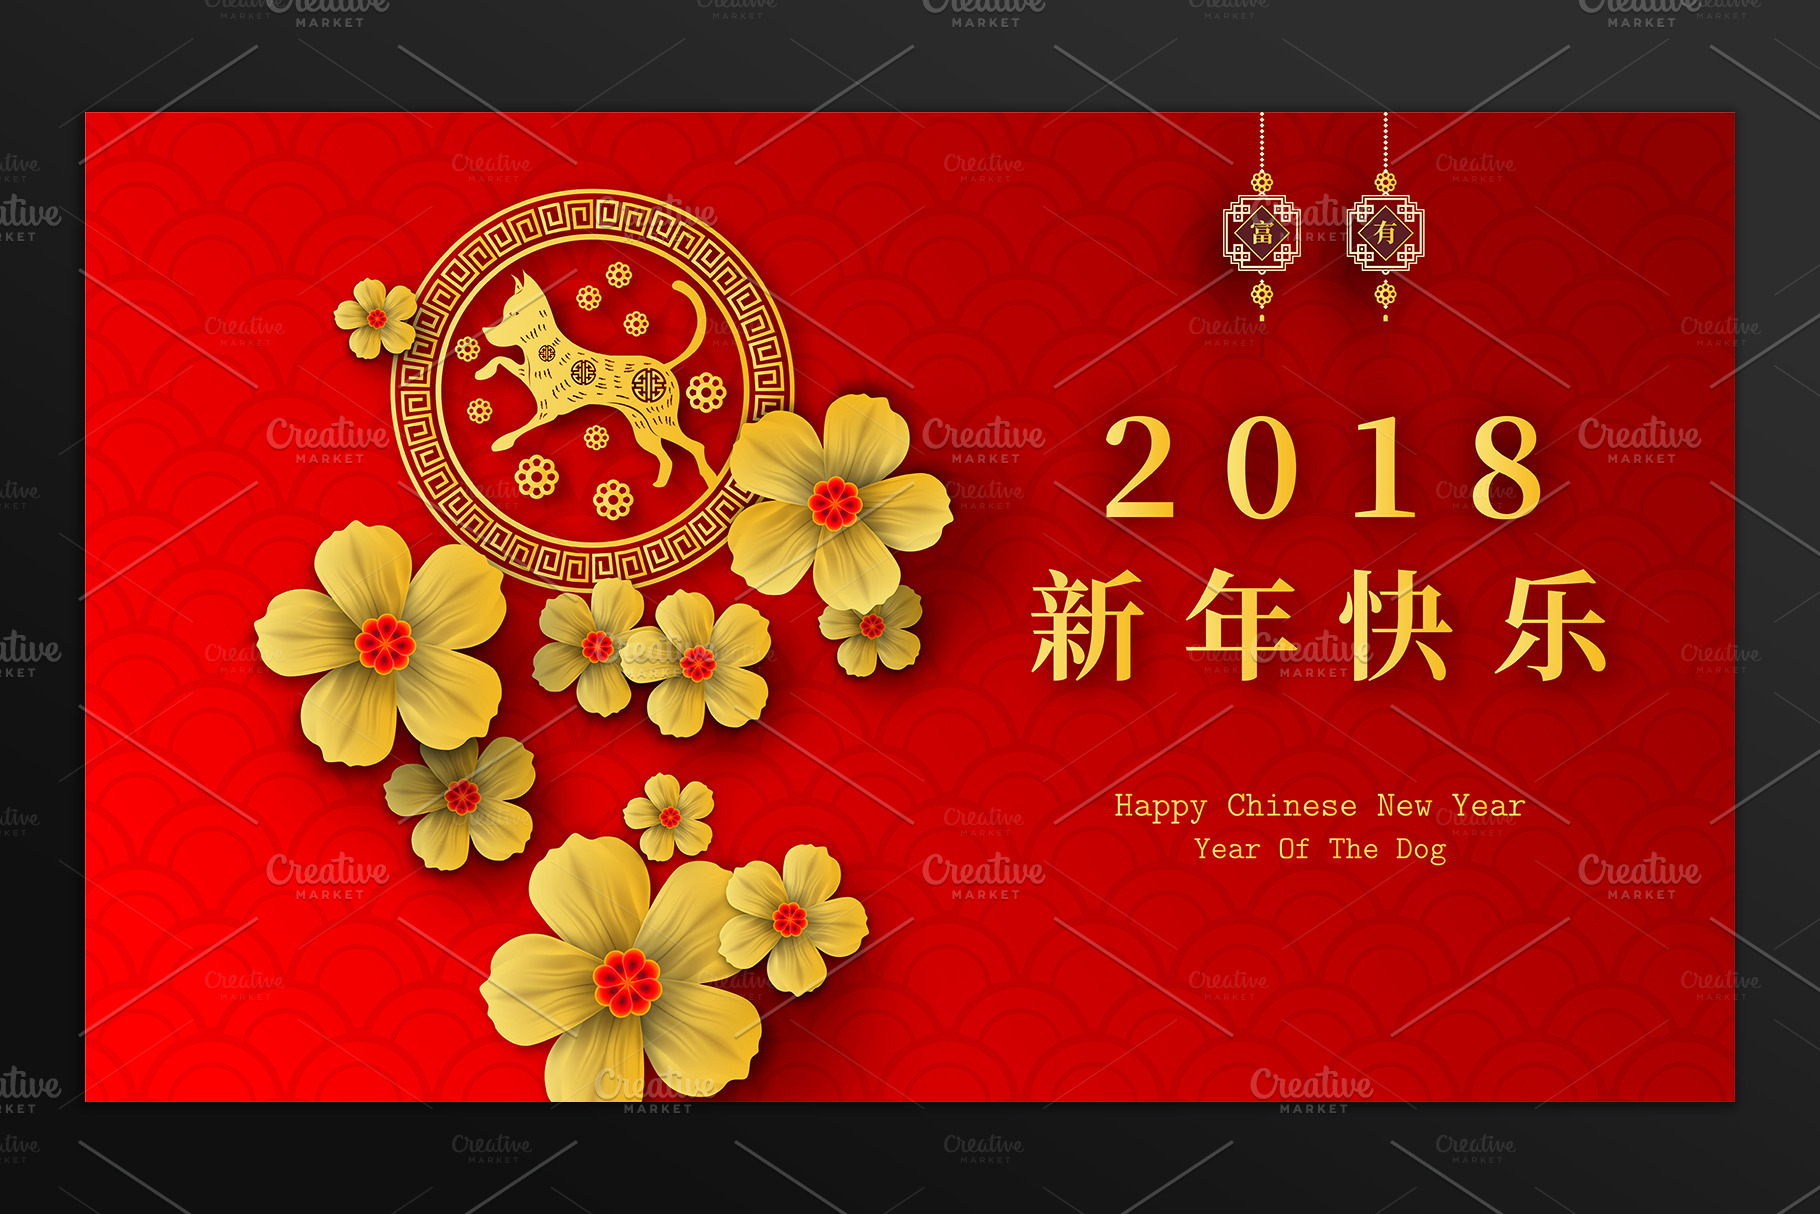 2018 Chinese New Year card ~ Card Templates ~ Creative Market